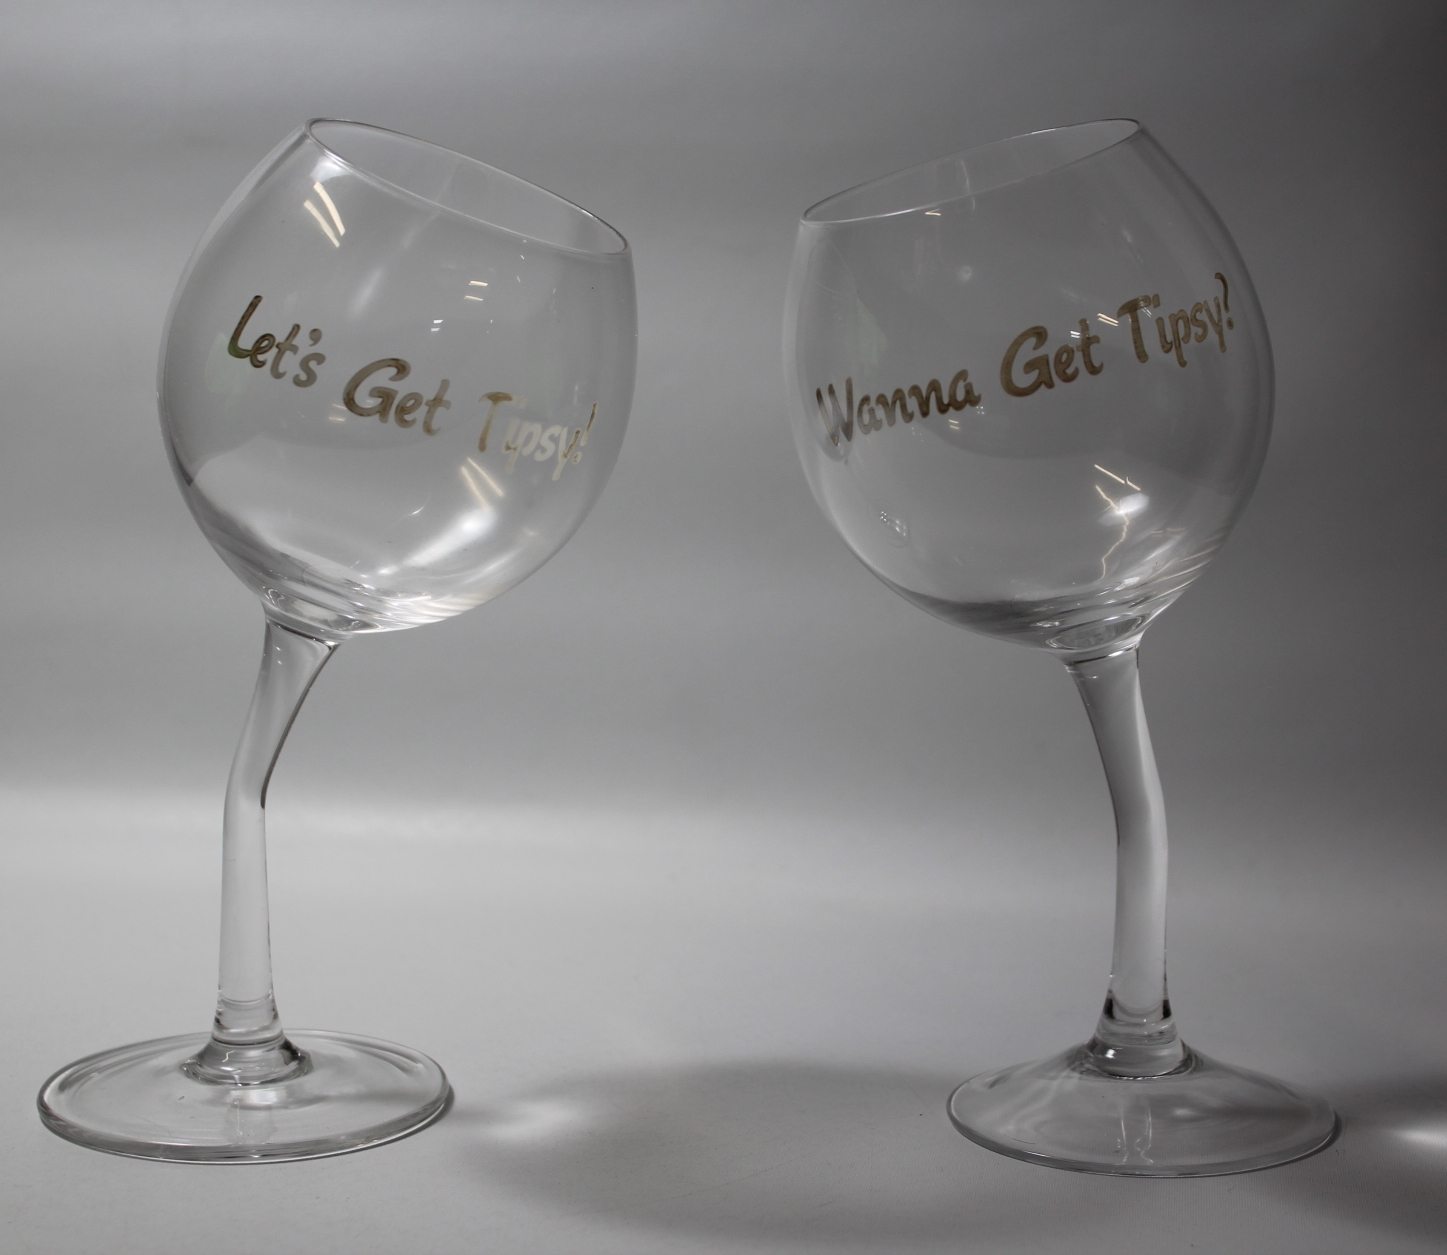 New Bigmouth Tipsy Tilted Imprinted Wine Glasses 2 Set Each Holds 12oz